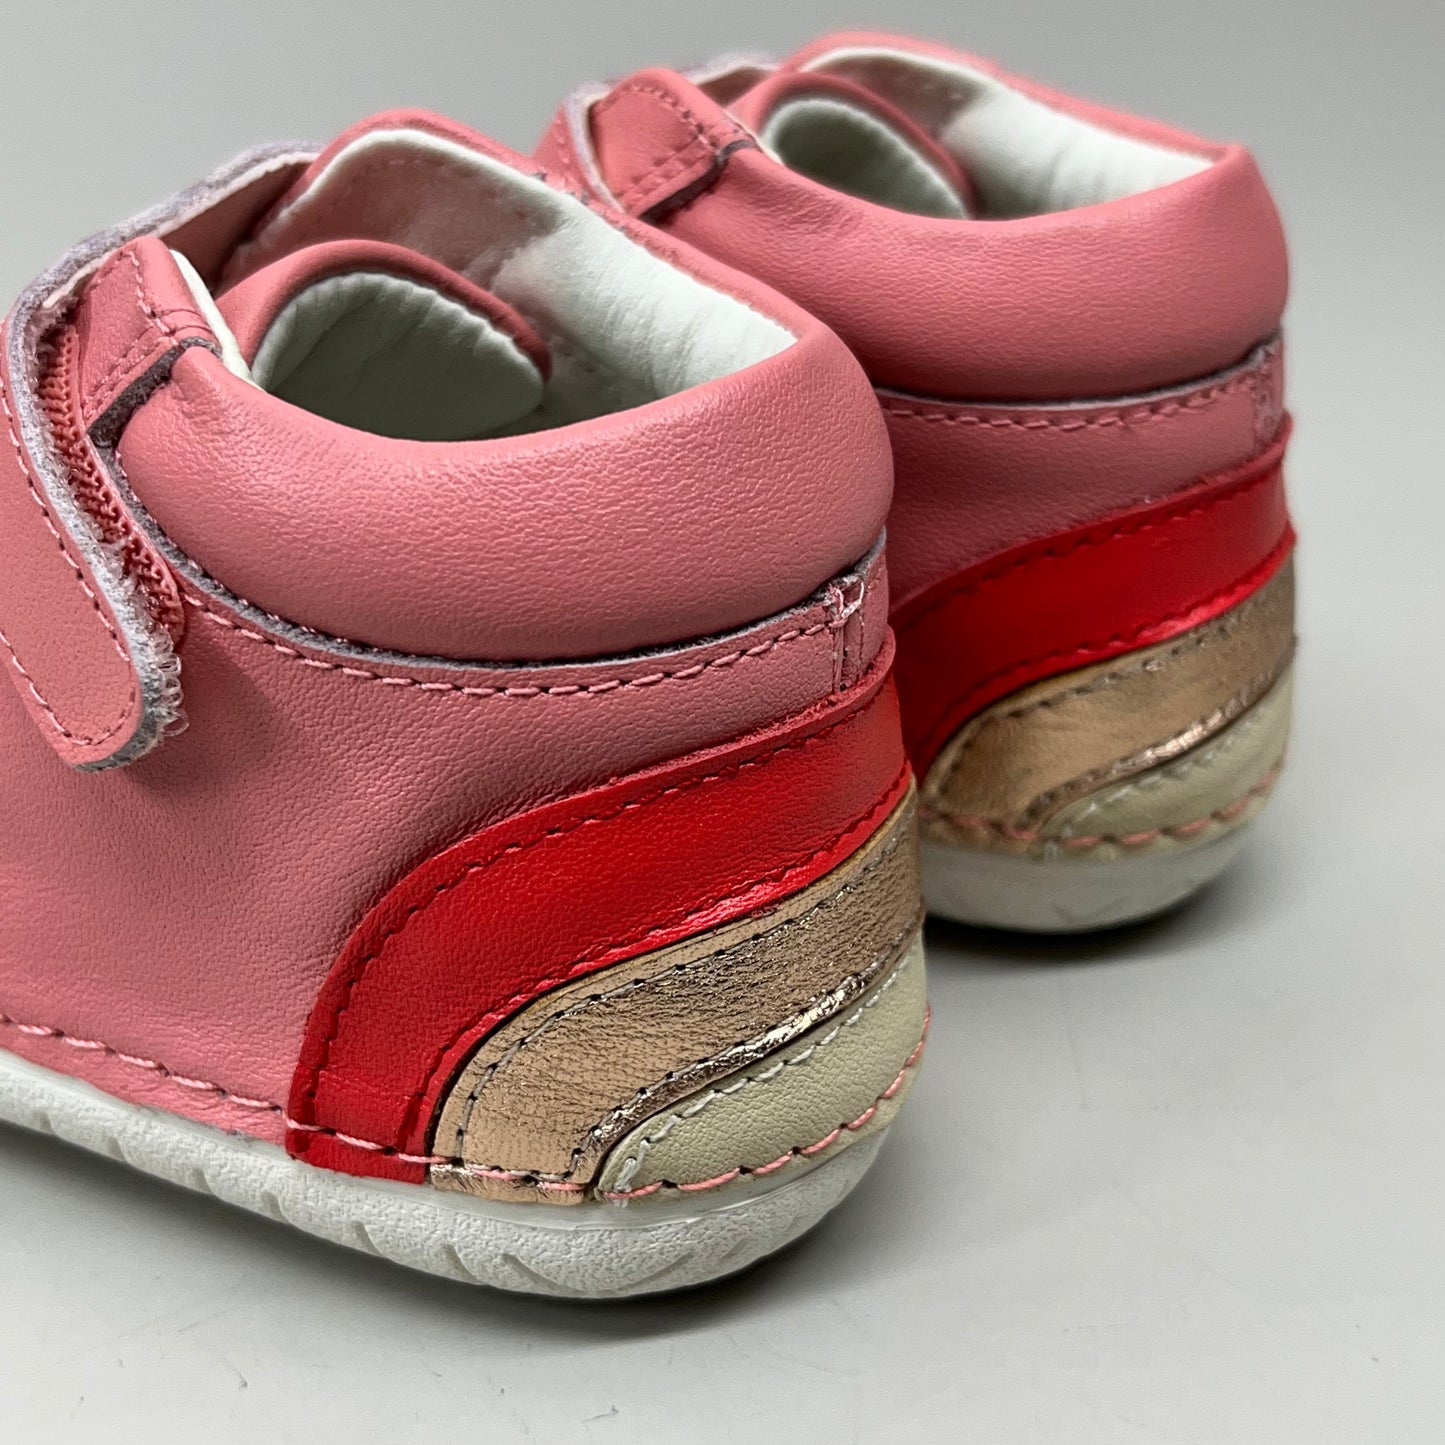 OLD SOLES Baby Rainbow Champster Leather Shoe Sz 21 US 5 Rossini/Red/Copper/Cream #4091